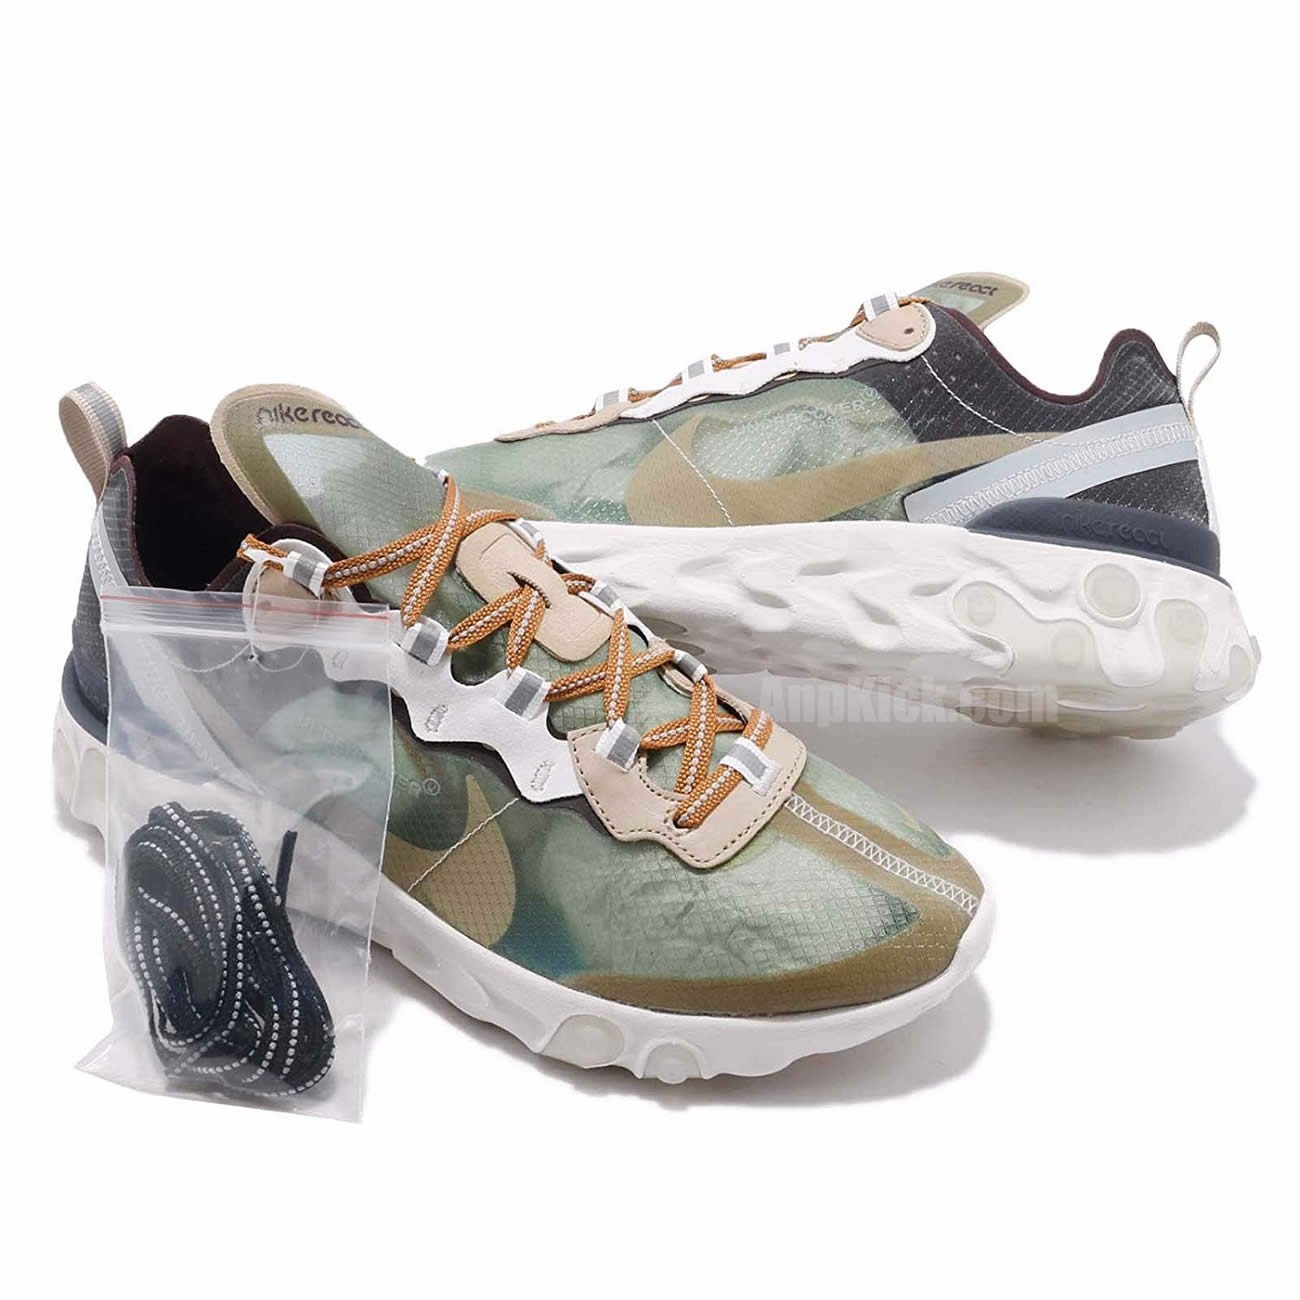 Undercover x Nike React Element 87 "Green Mist" Shoes Collection BQ2718-300